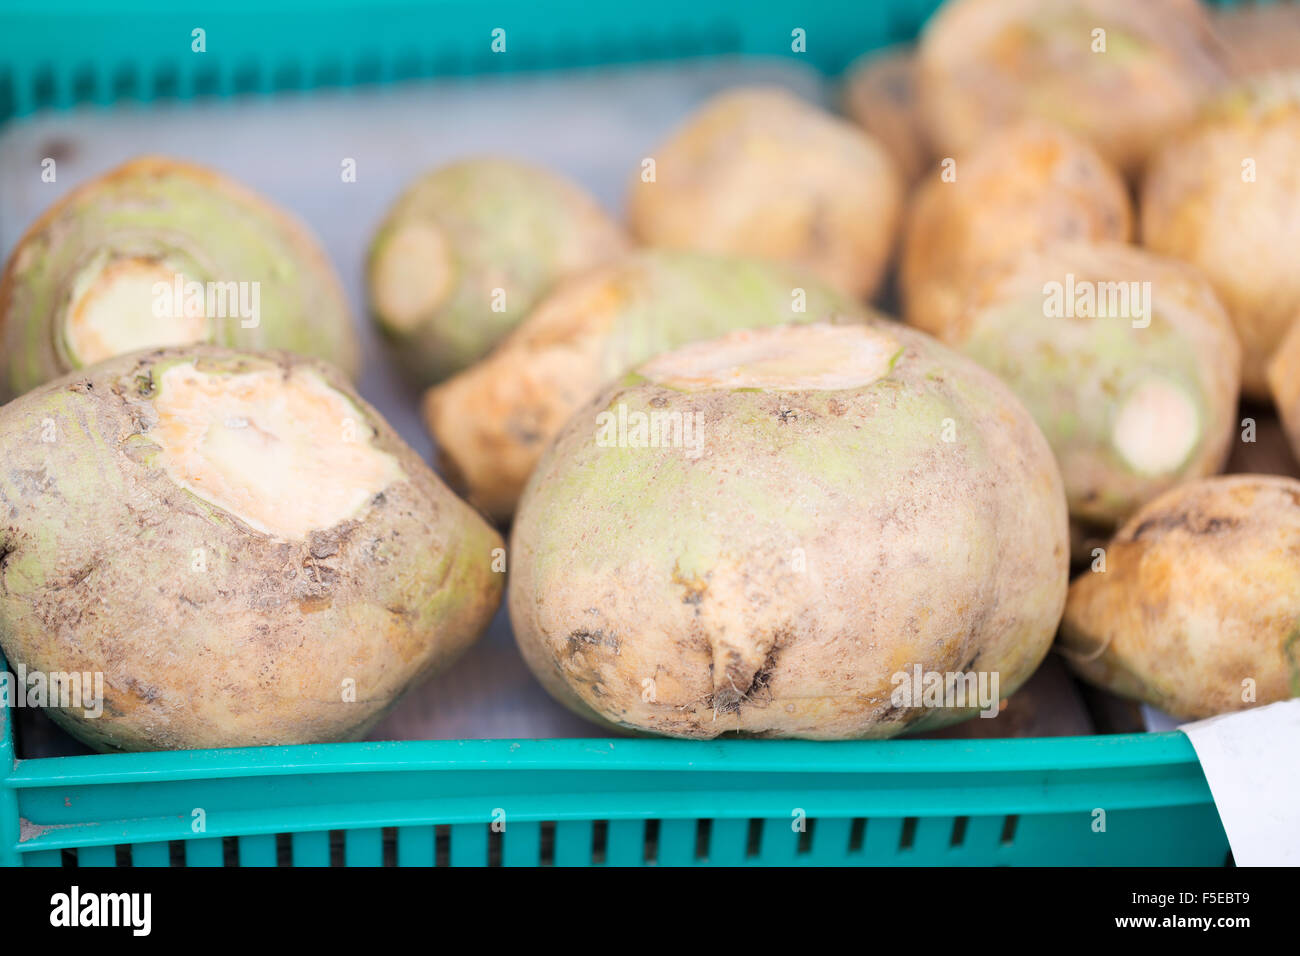 close up of swede or turnip at street market Stock Photo